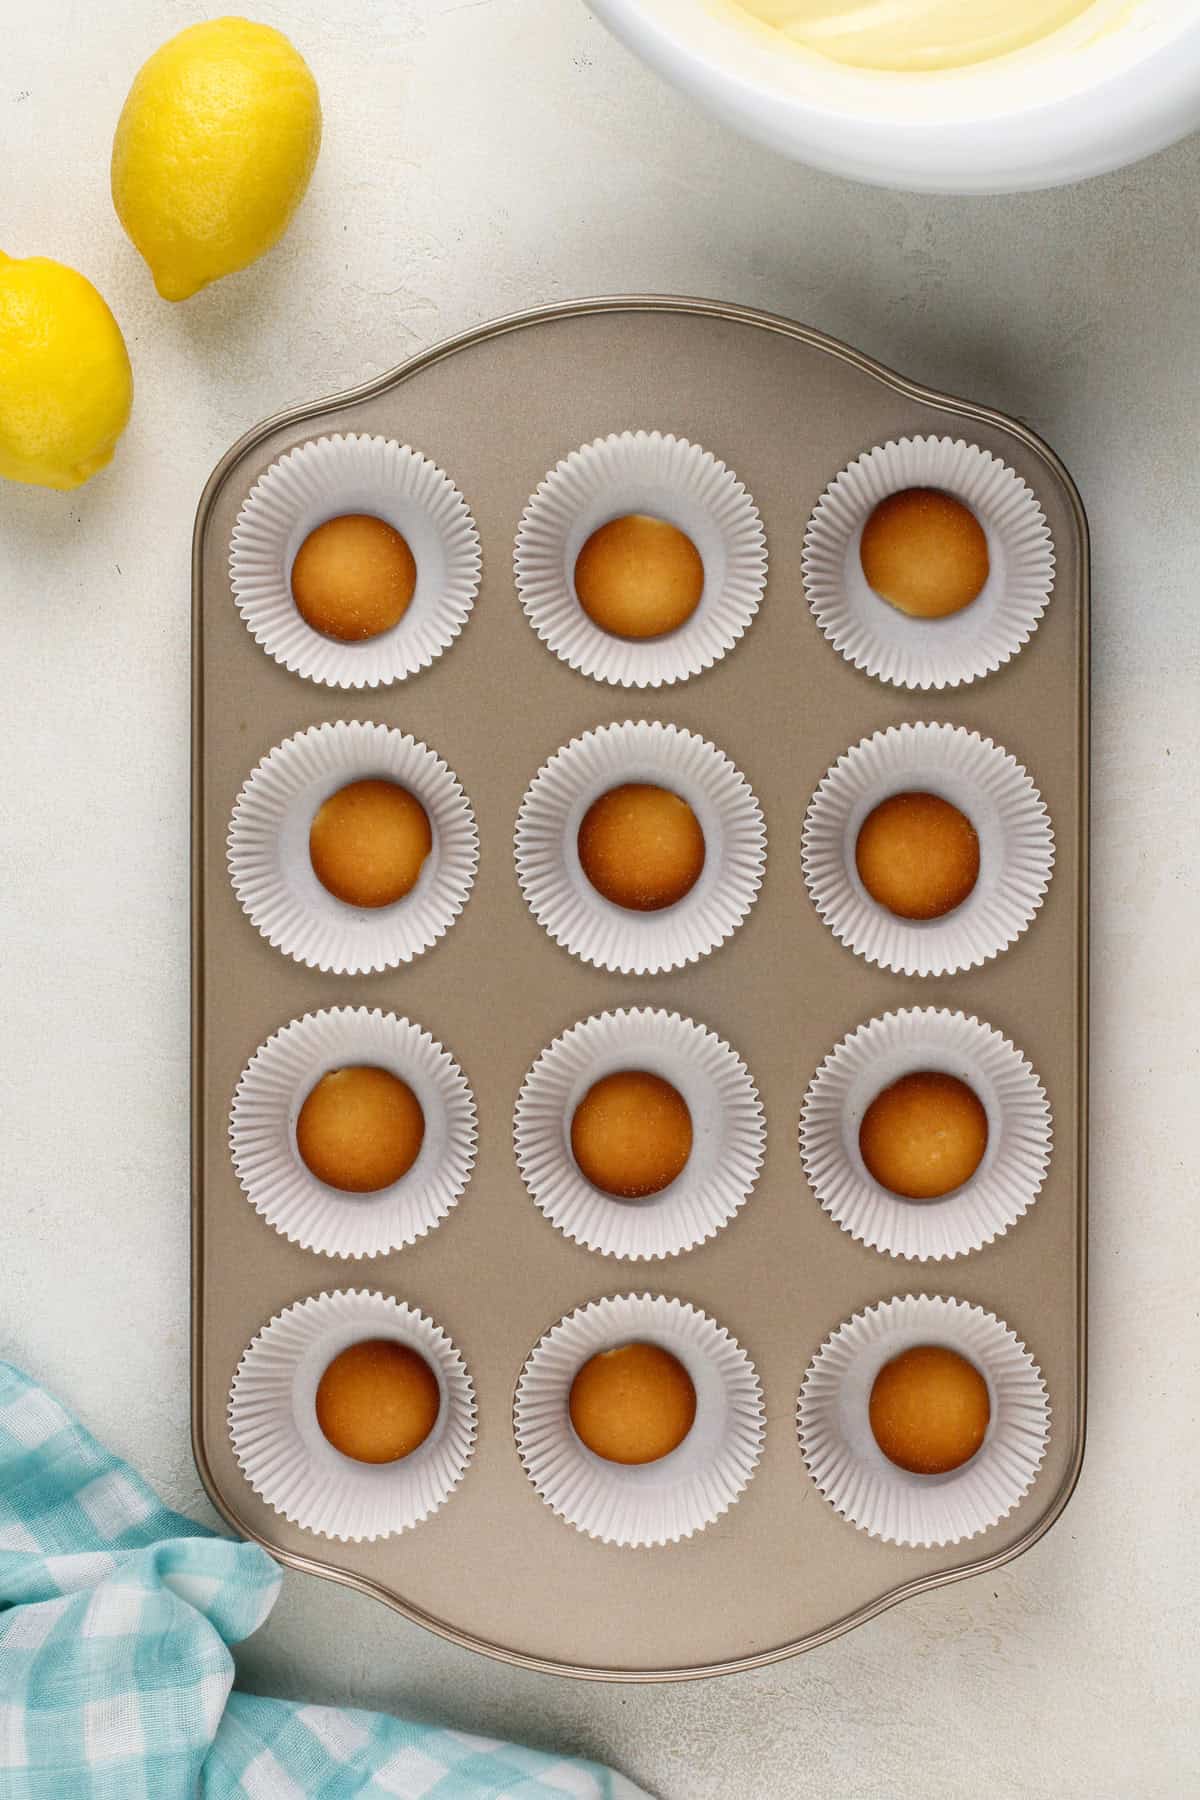 Vanilla wafer cookies in the bottom of muffin cups in a muffin pan.